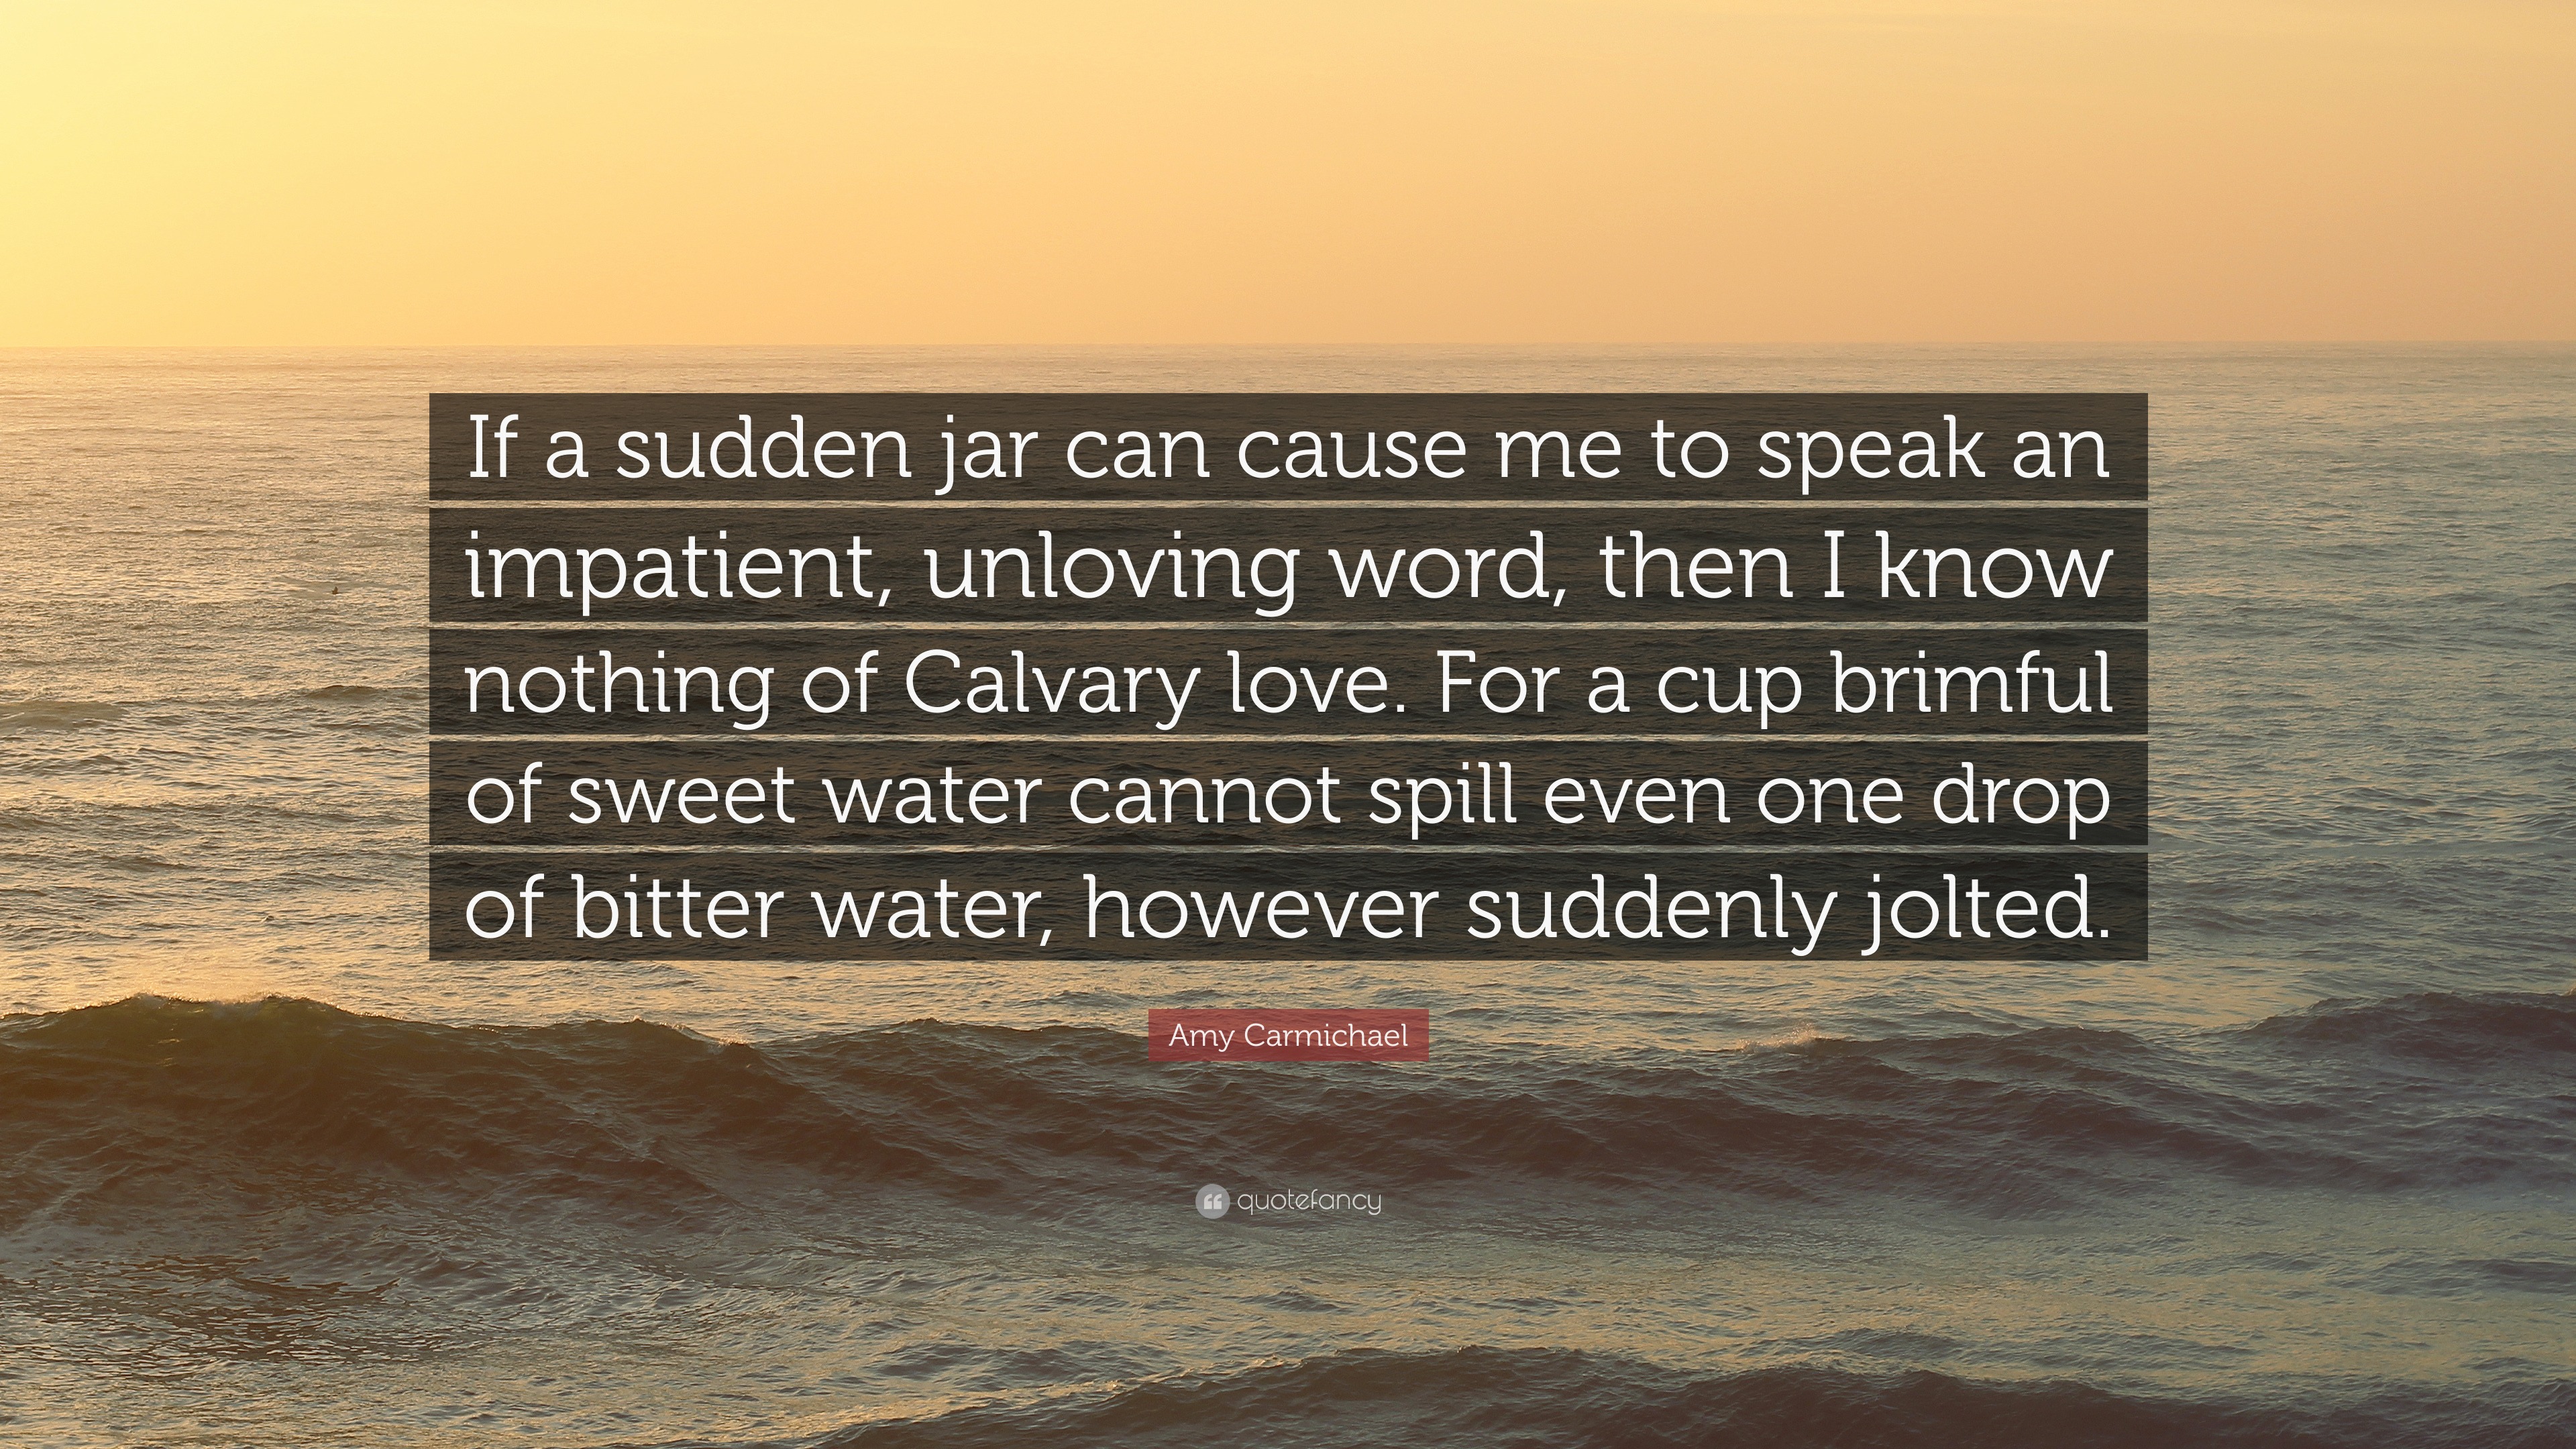 Amy Carmichael Quote: "If a sudden jar can cause me to speak an impatient, unloving word, then I ...